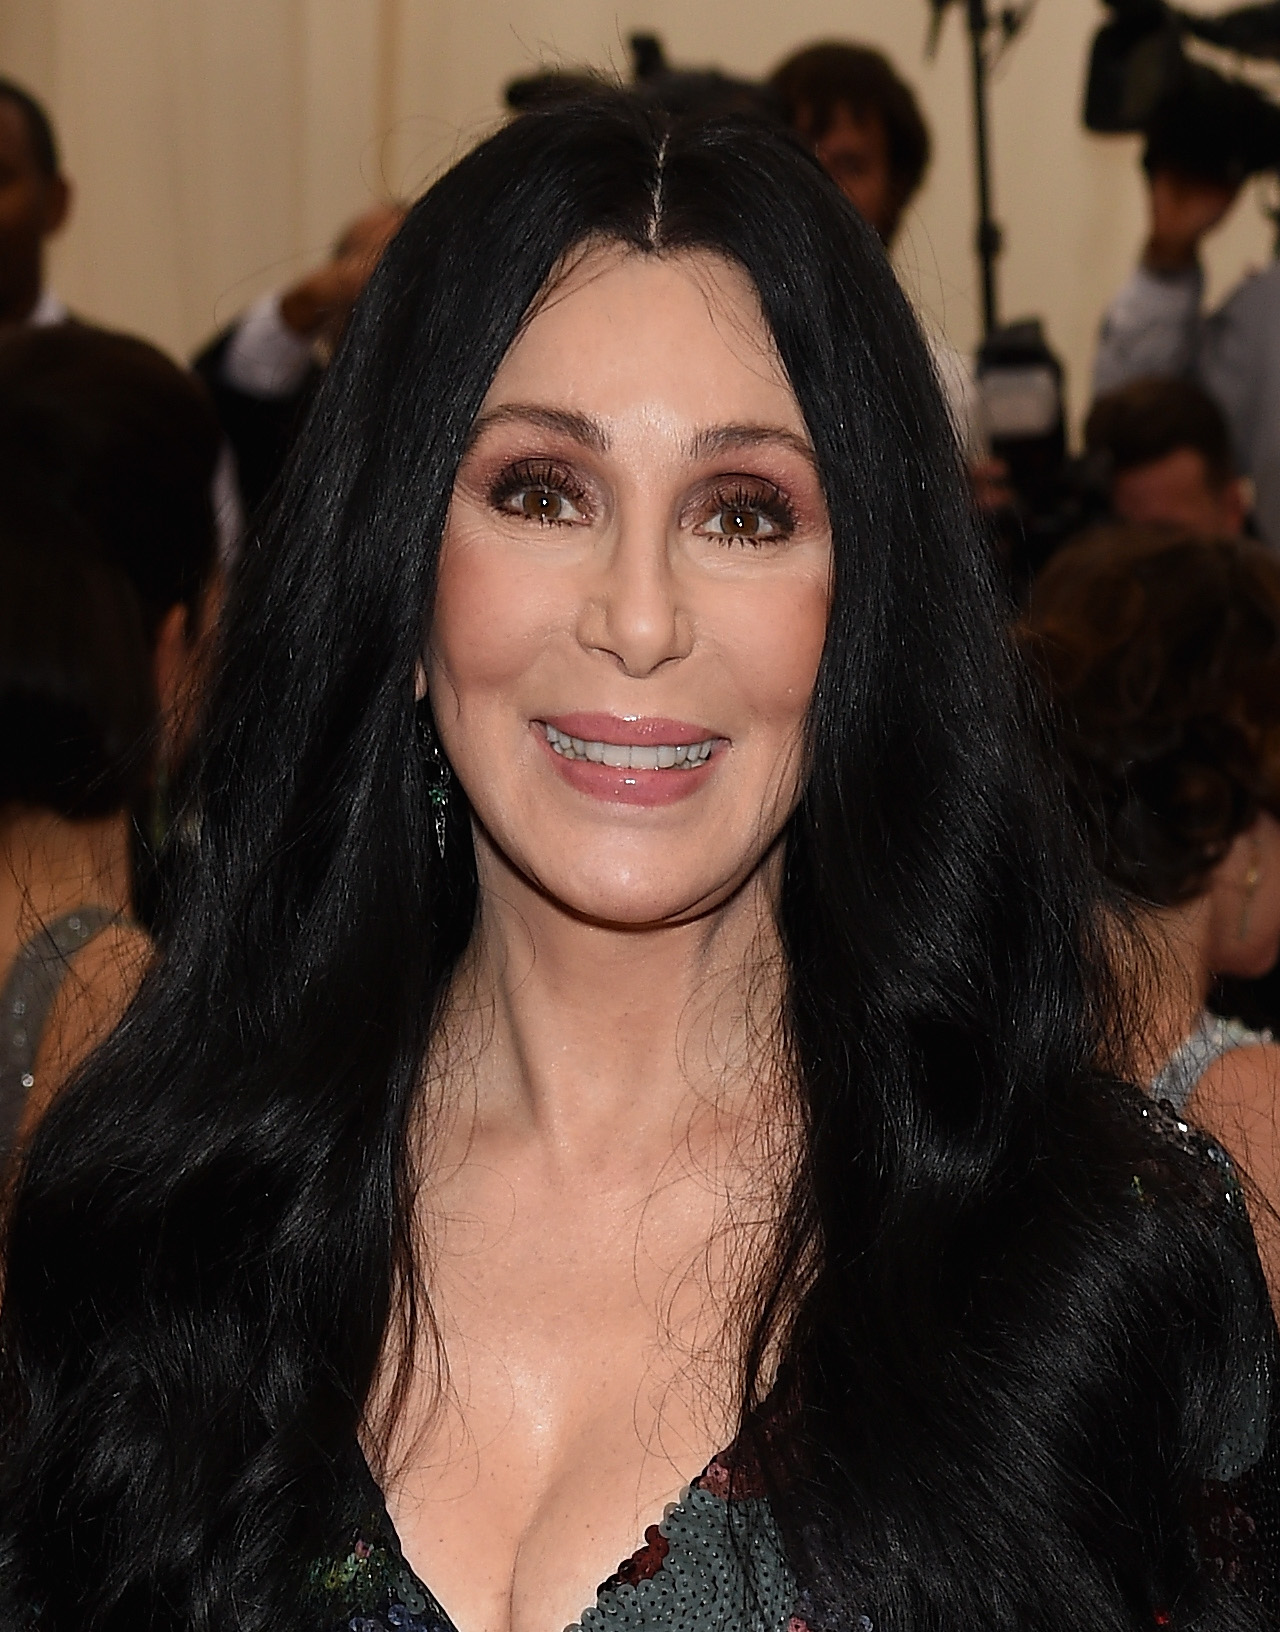 Cher is Ready to Perform Again After Recovering From a Serious Illness